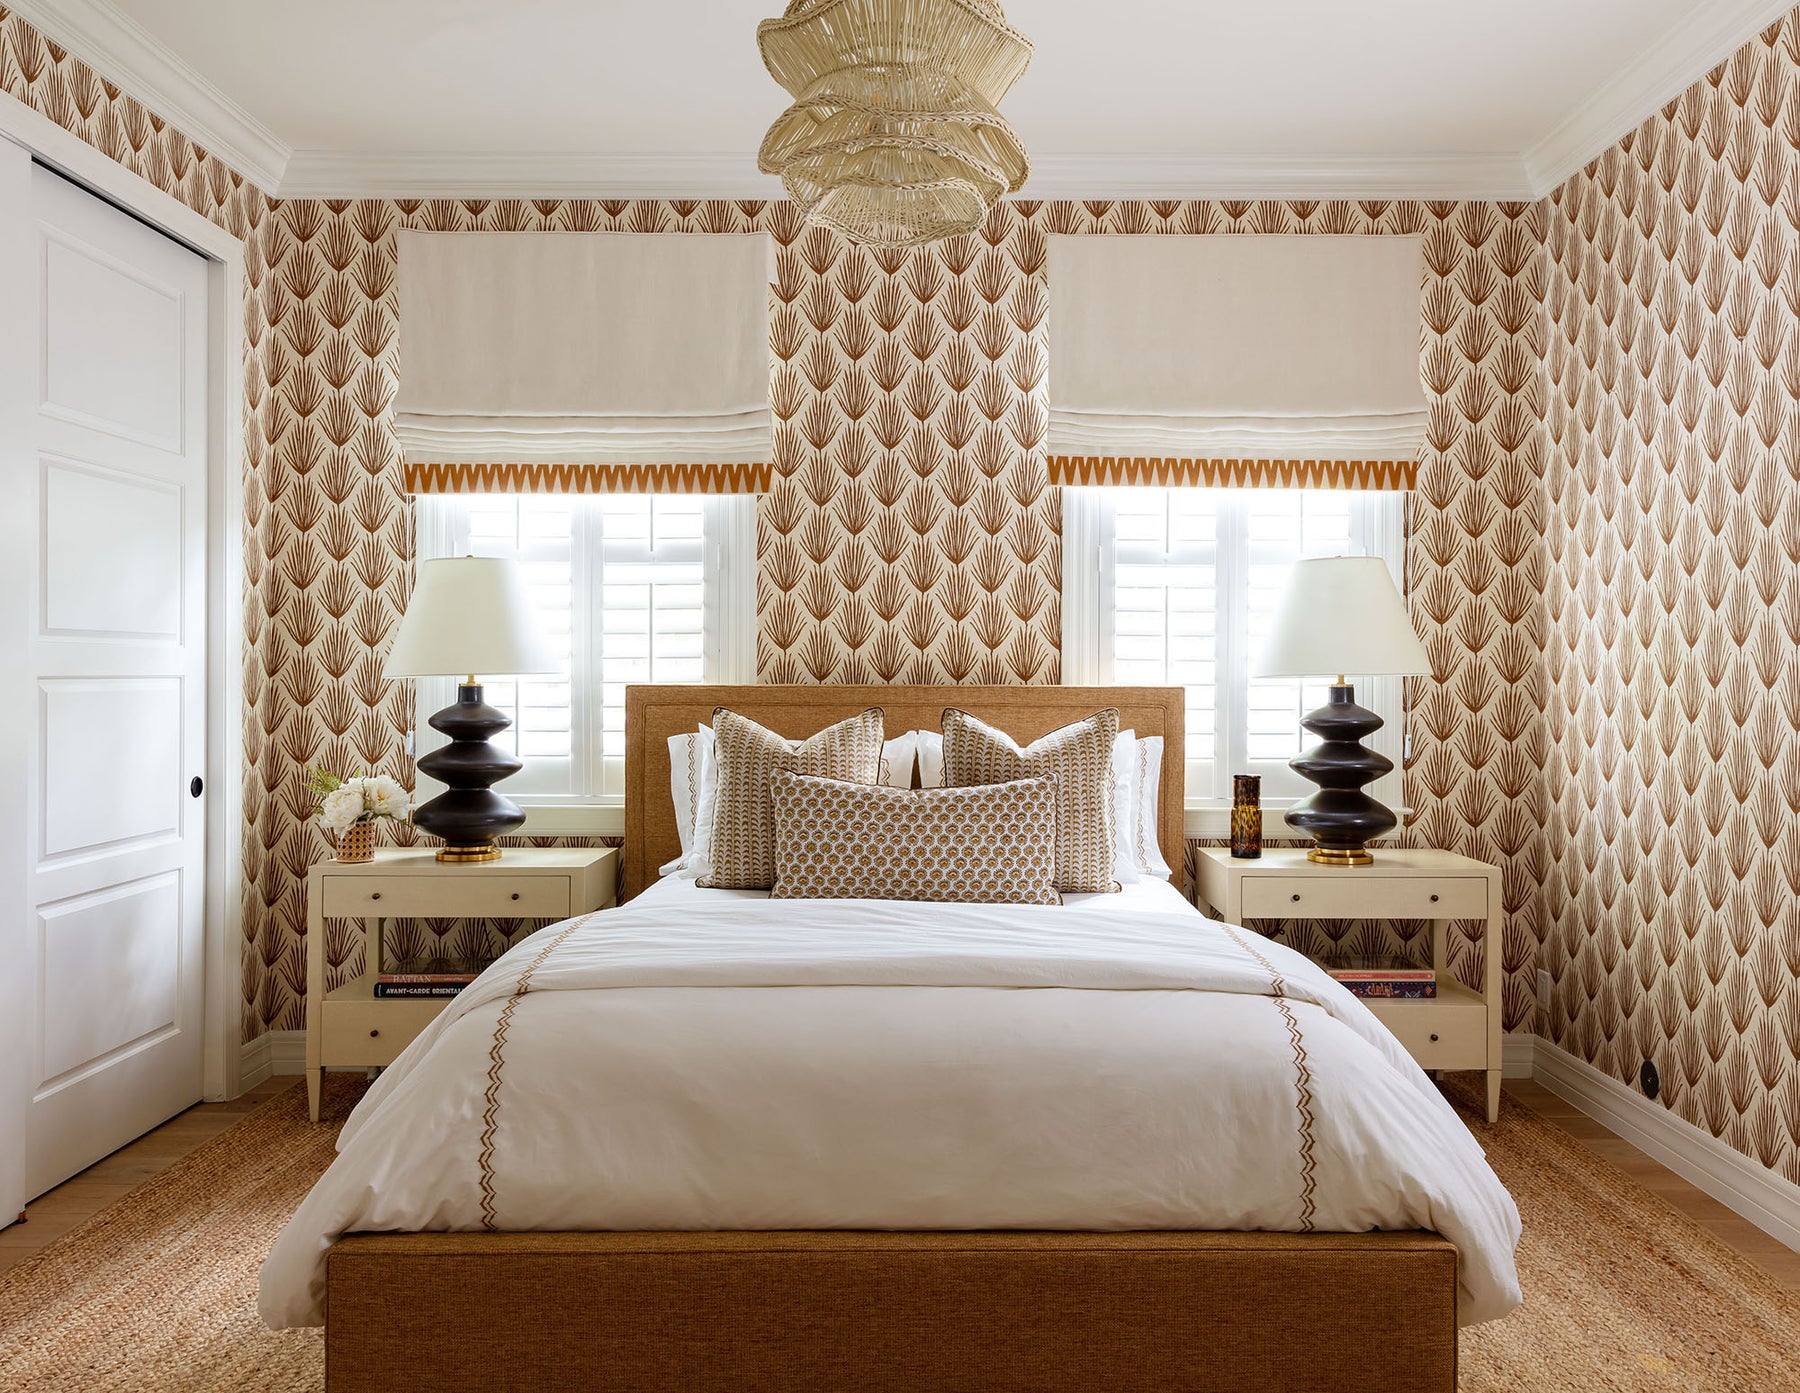 image of bedroom with brown palm leaf print wallpaper and coordinating white and brown tropical print bed pillows, natural jute rug, black ceramic lamps and white roman shades